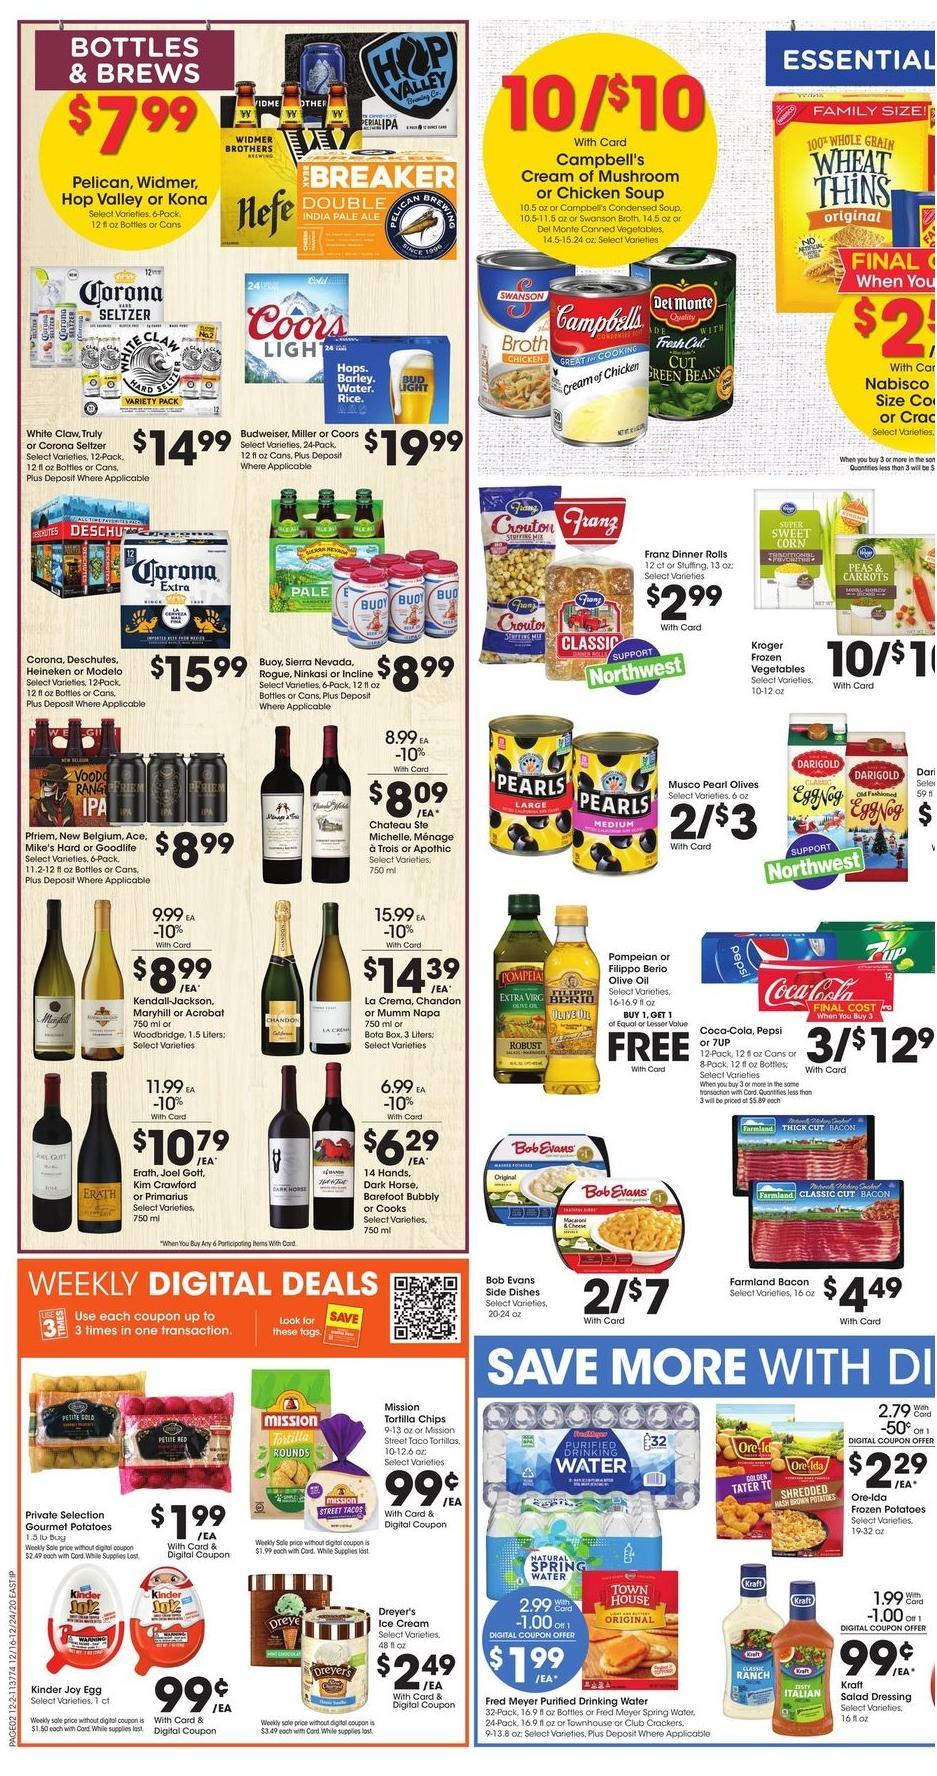 Fred Meyer Weekly Ad from December 16